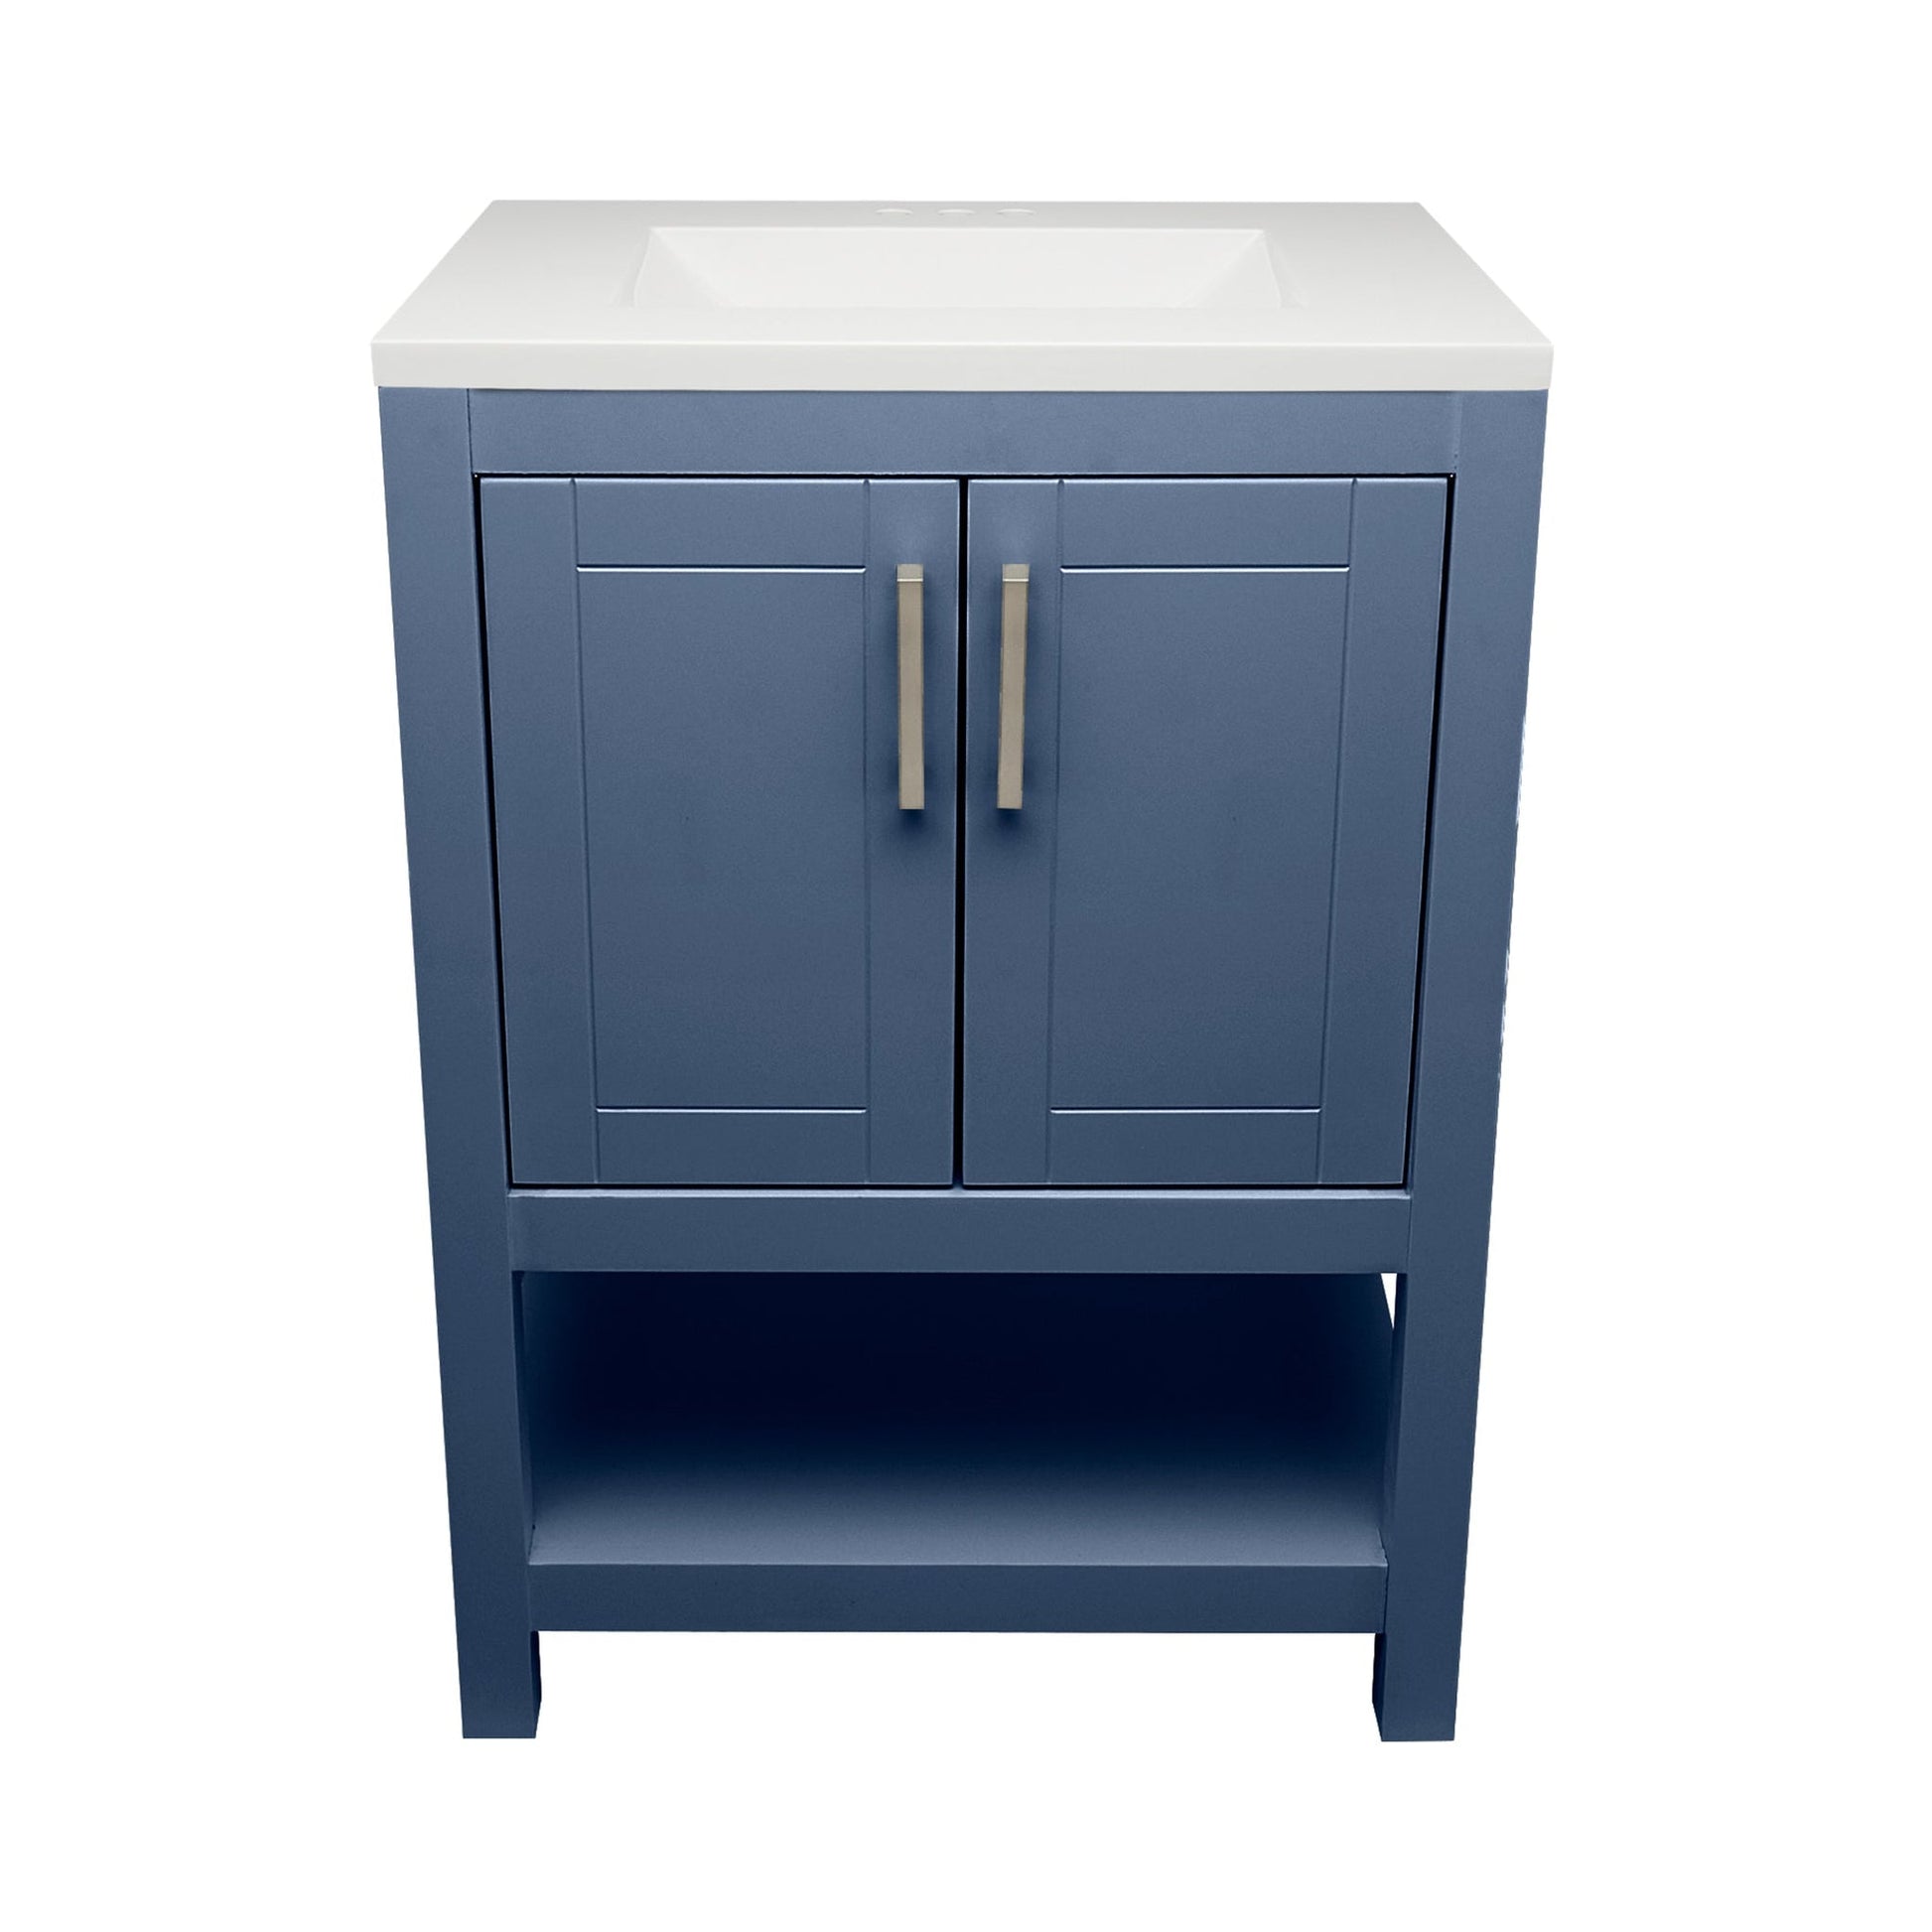 Ella's Bubbles Taos 25" Navy Blue Bathroom Vanity With White Cultured Marble Top and Sink